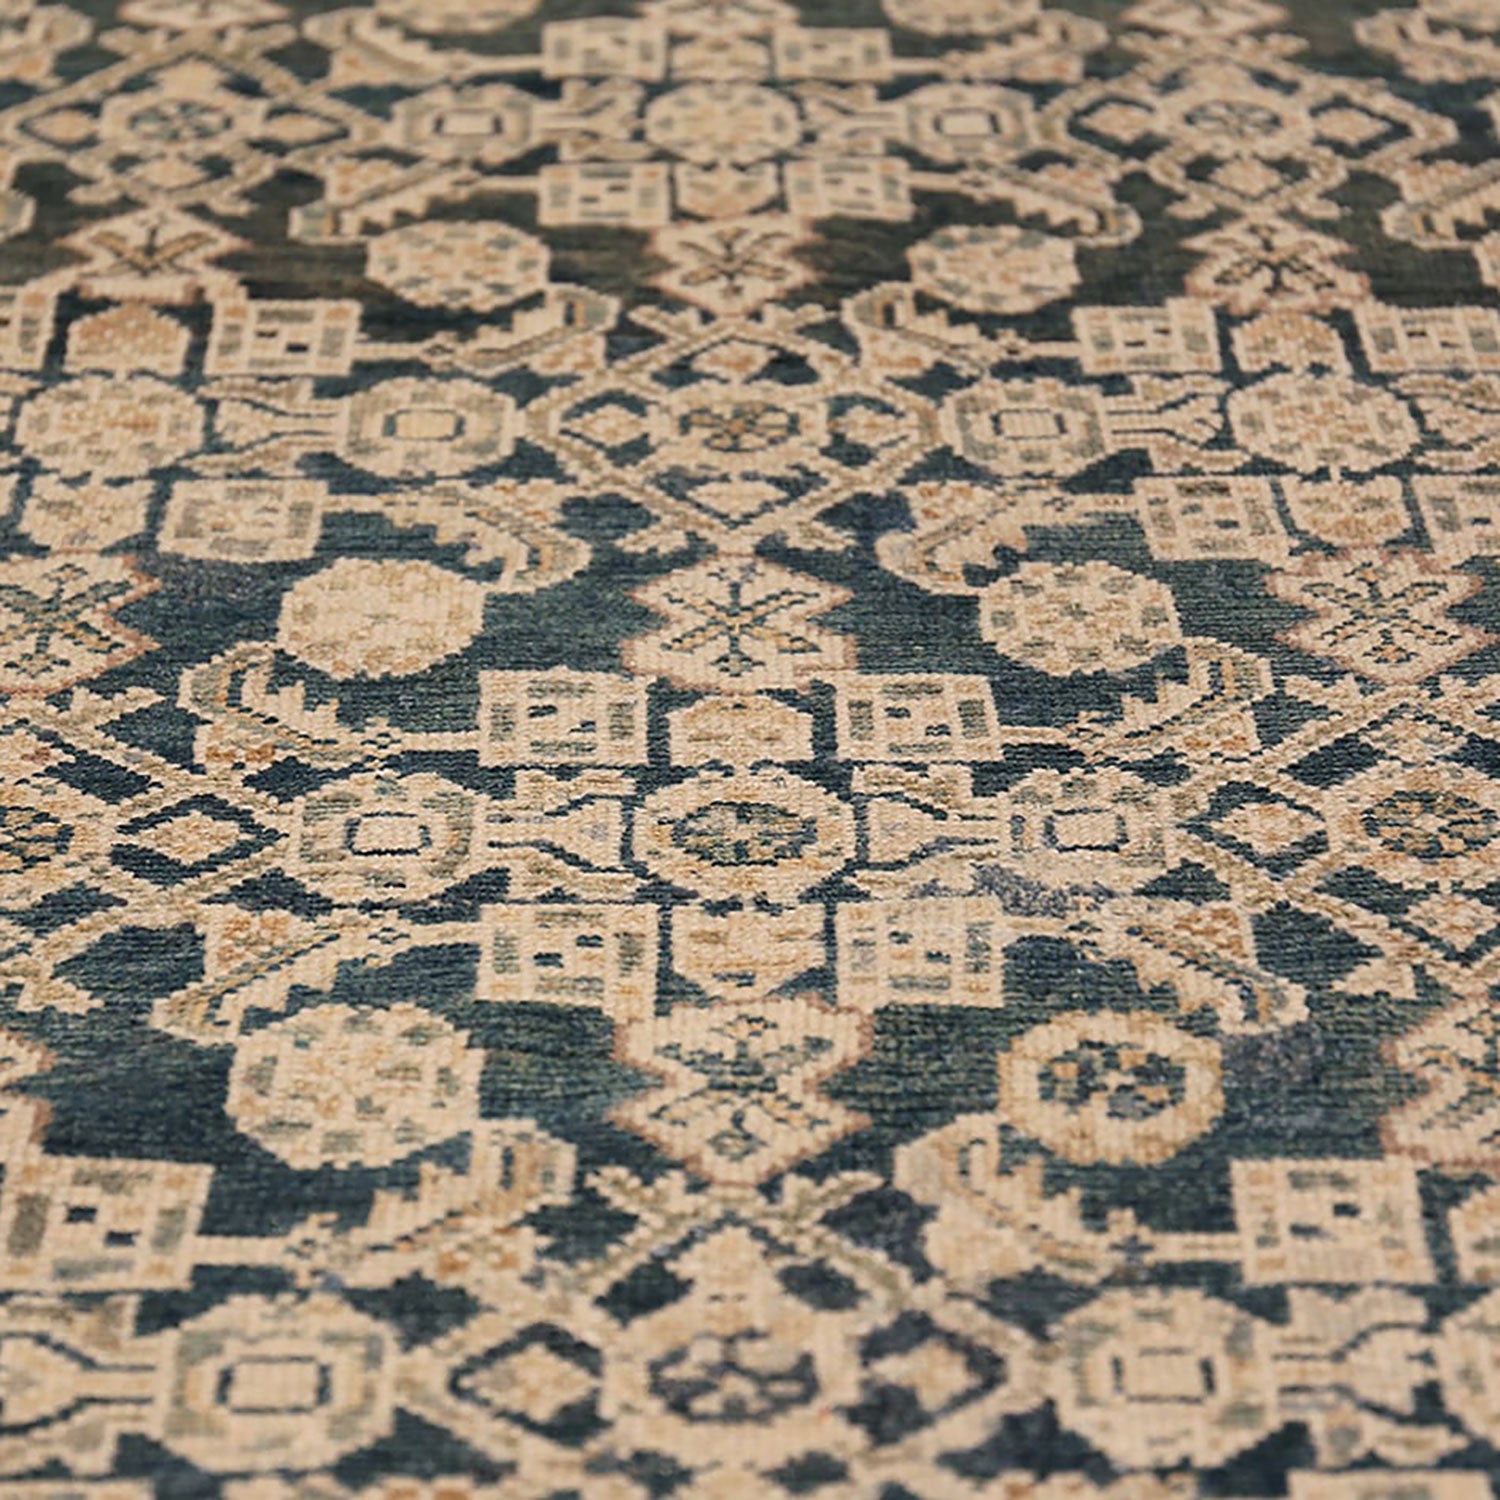 Intricate geometric patterns adorn a quality woven area rug.